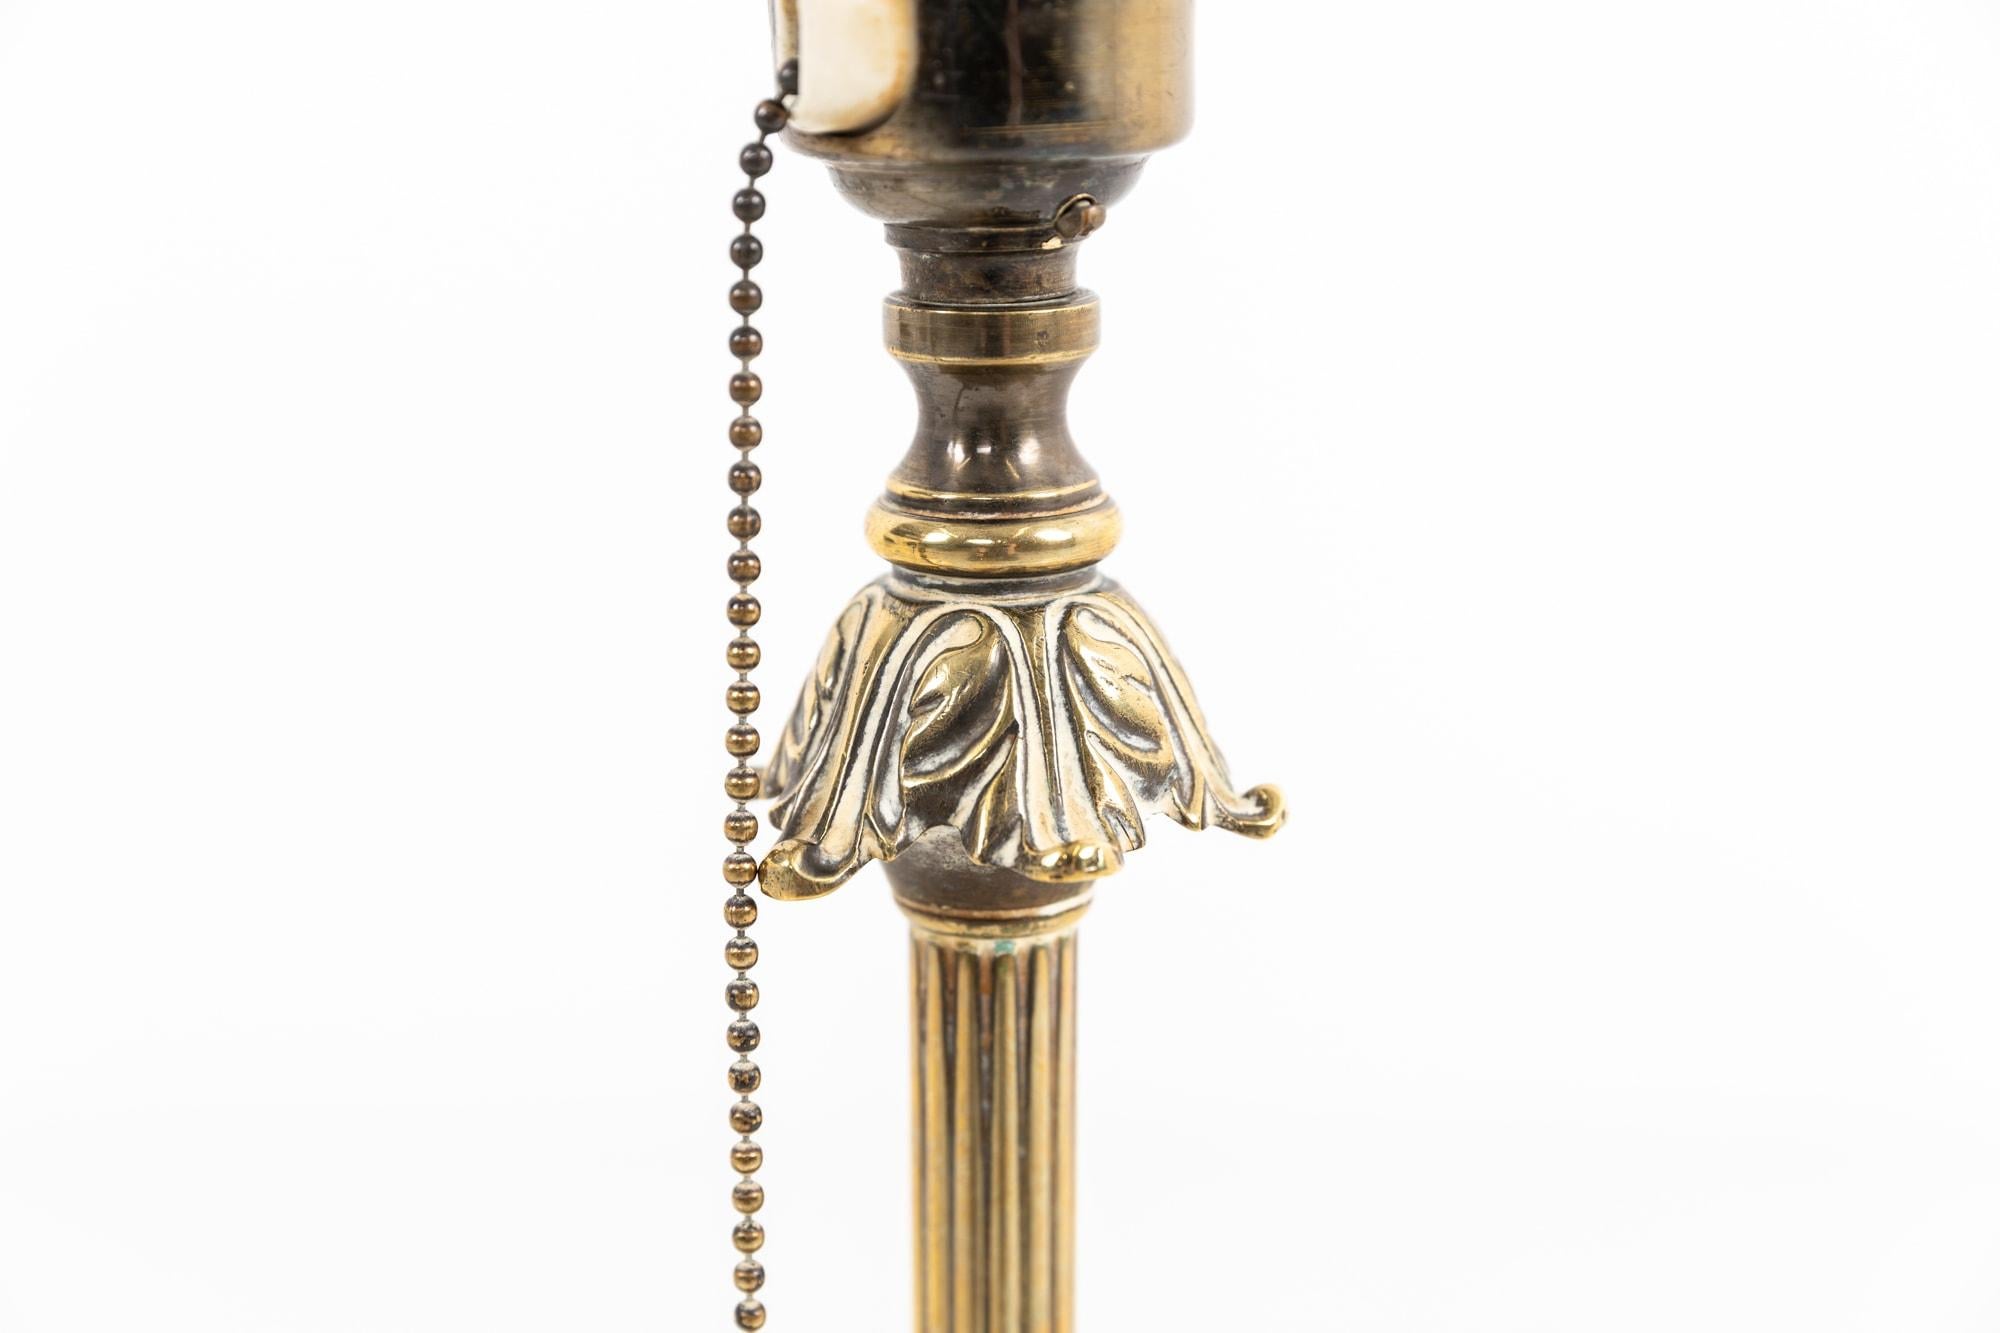 English Early 20th Century Antique Vintage Brass Desk Table Lamp, circa 1920 For Sale